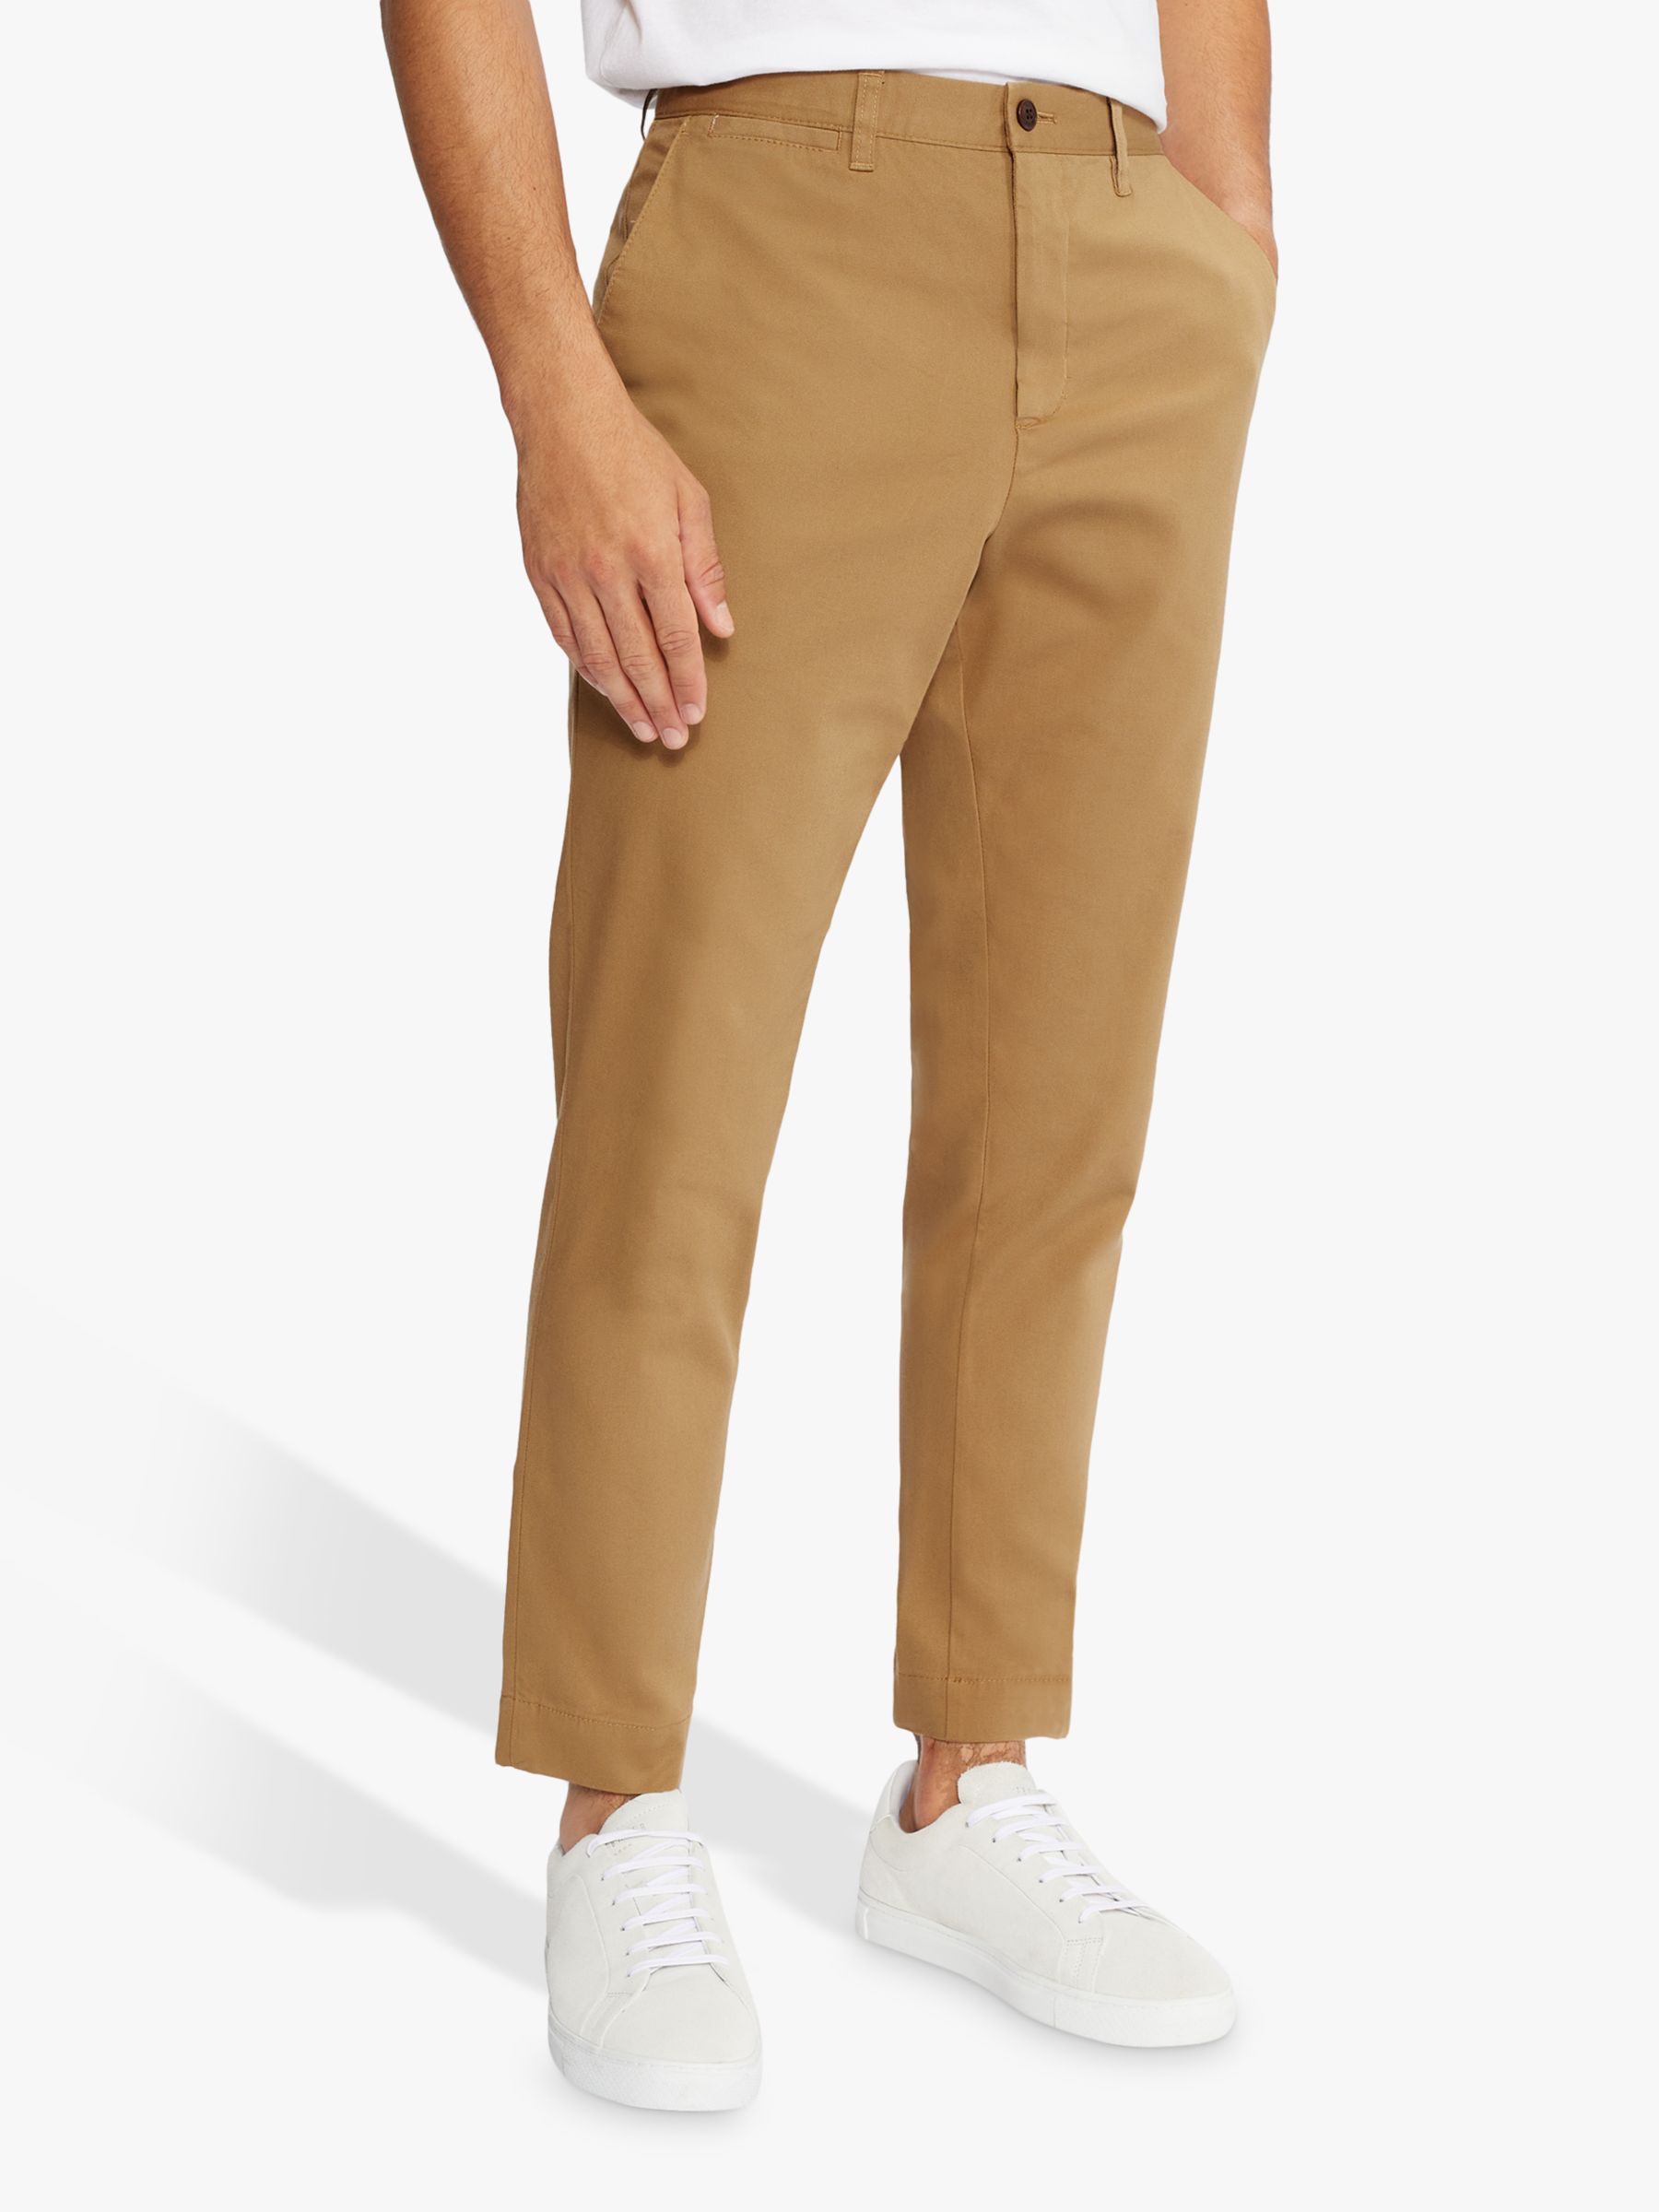 Ted Baker Genbee Cotton Lyocell Chinos, Natural at John Lewis & Partners